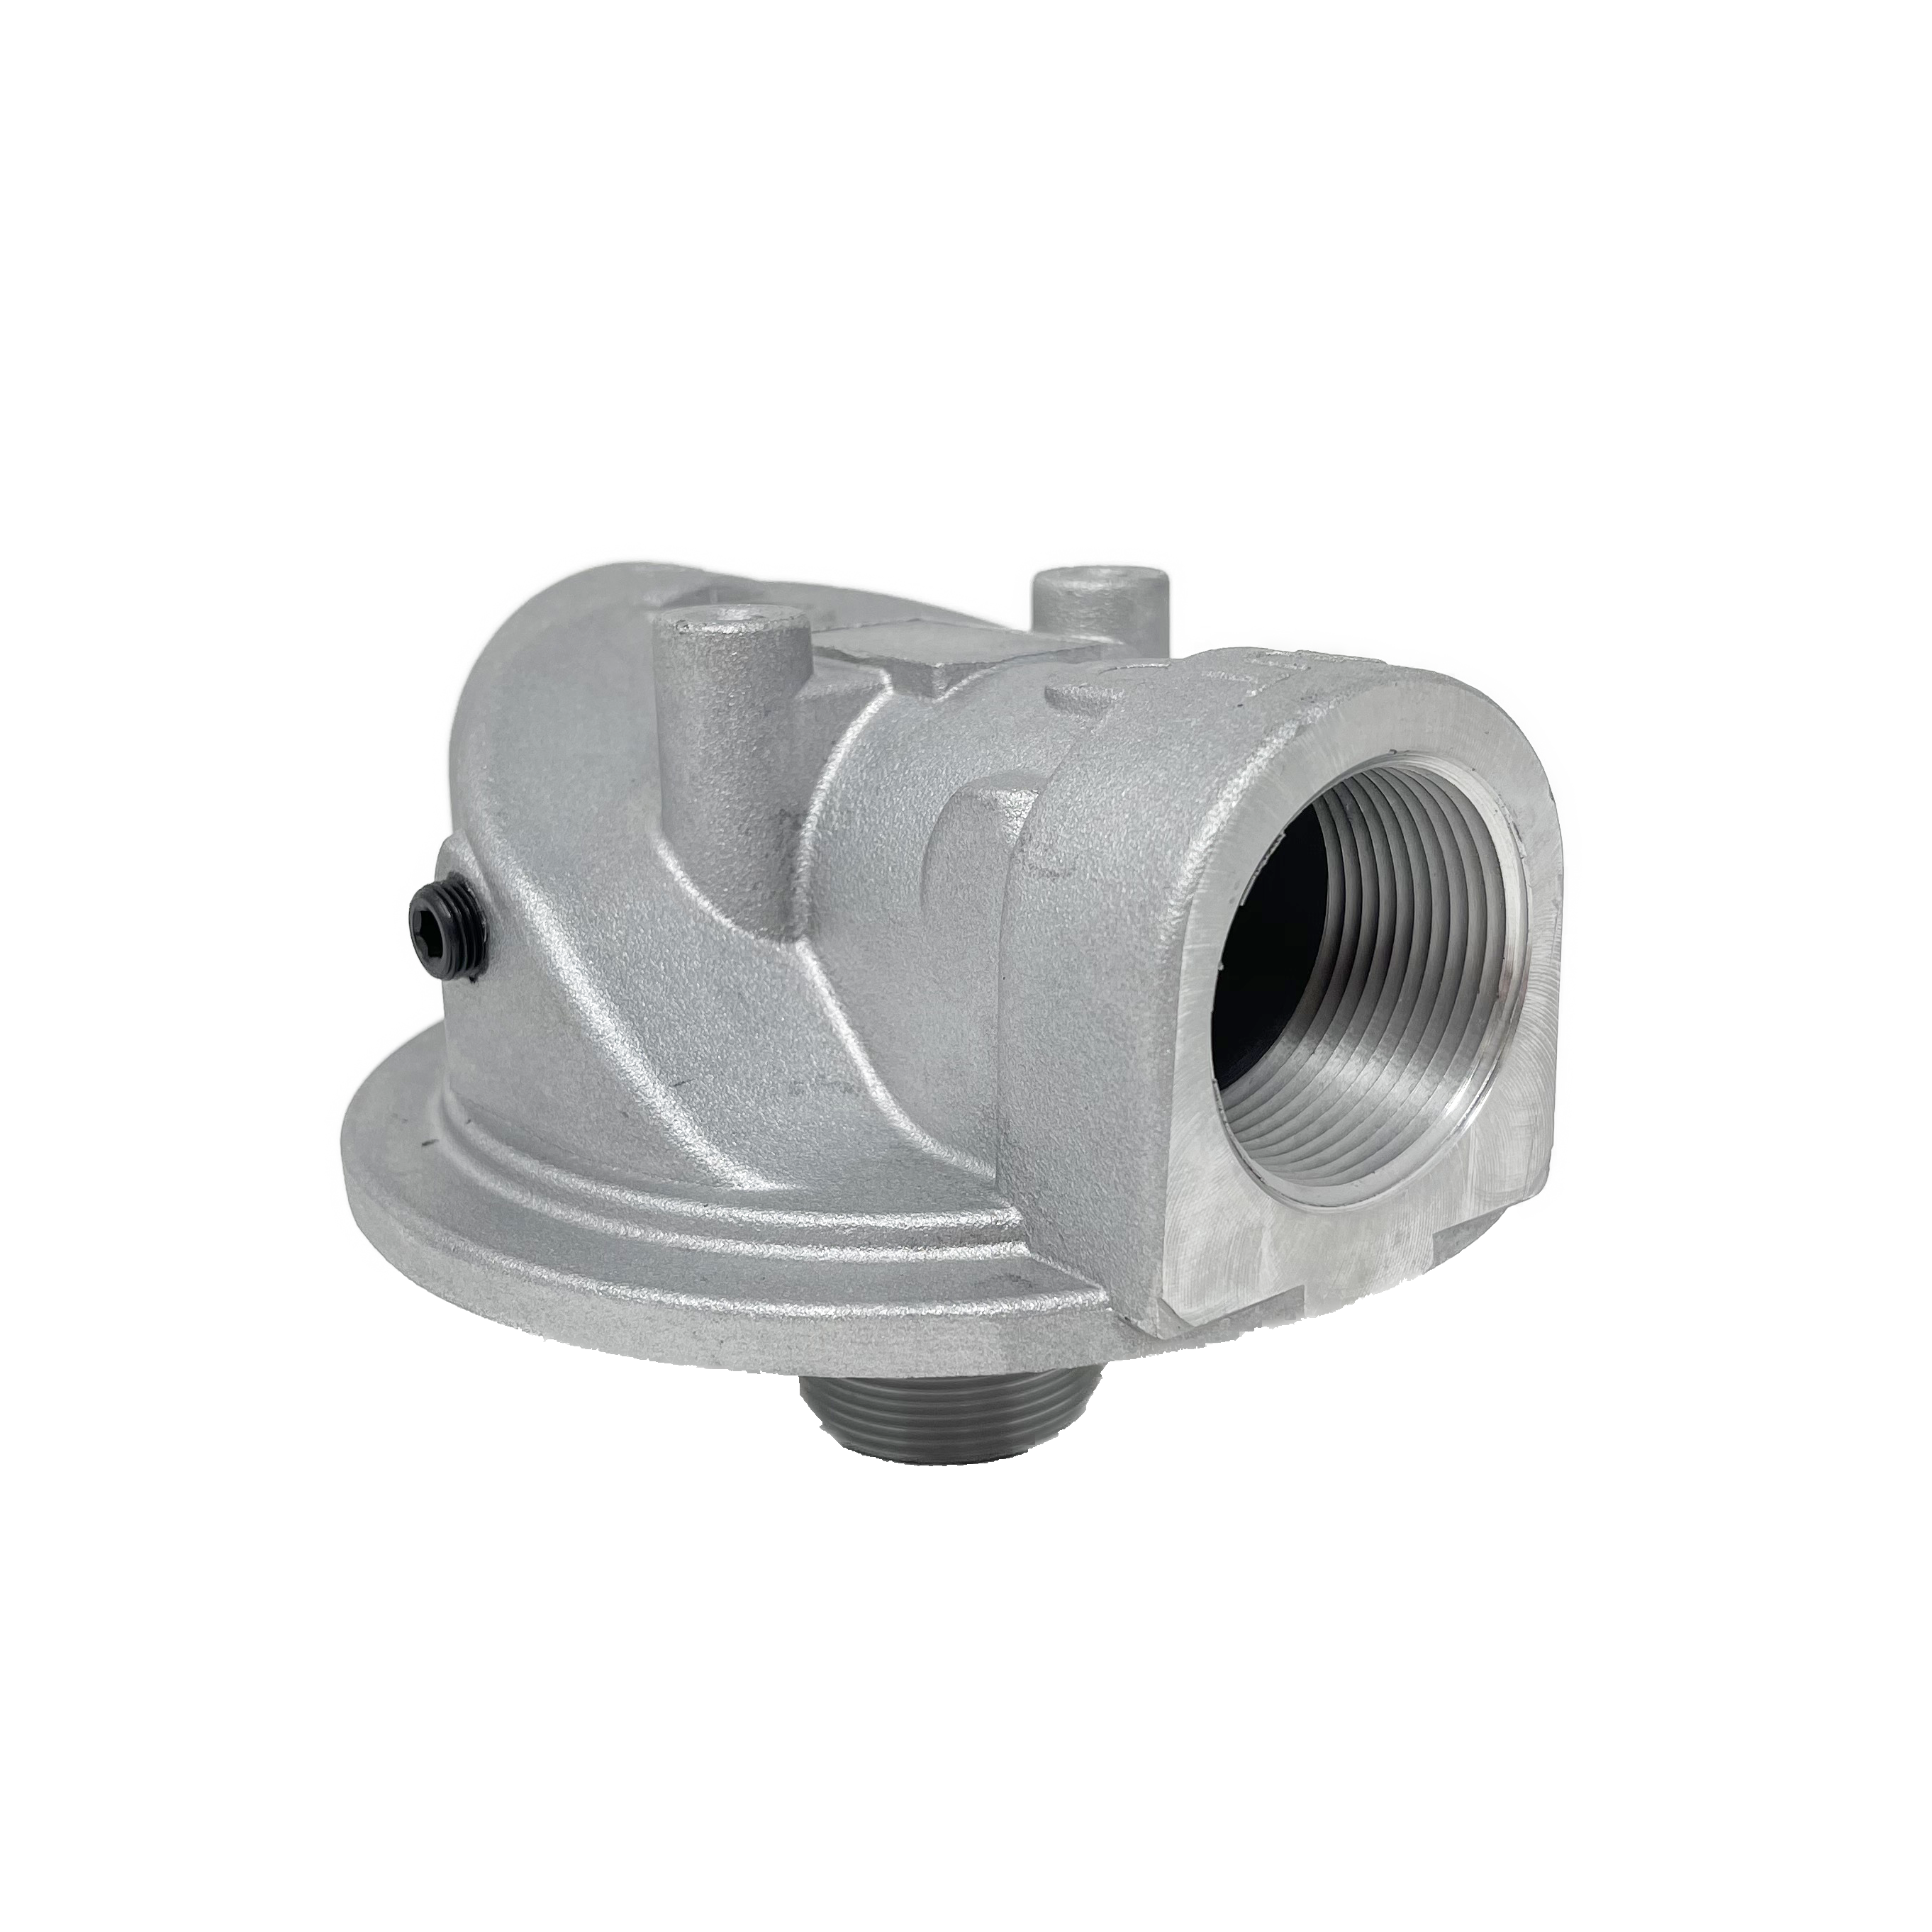 SSF-120-B1.7-4 : Stauff SSF Spin-On Filter Head, 60 GPM, 174psi, 1.25" NPT, With Bypass